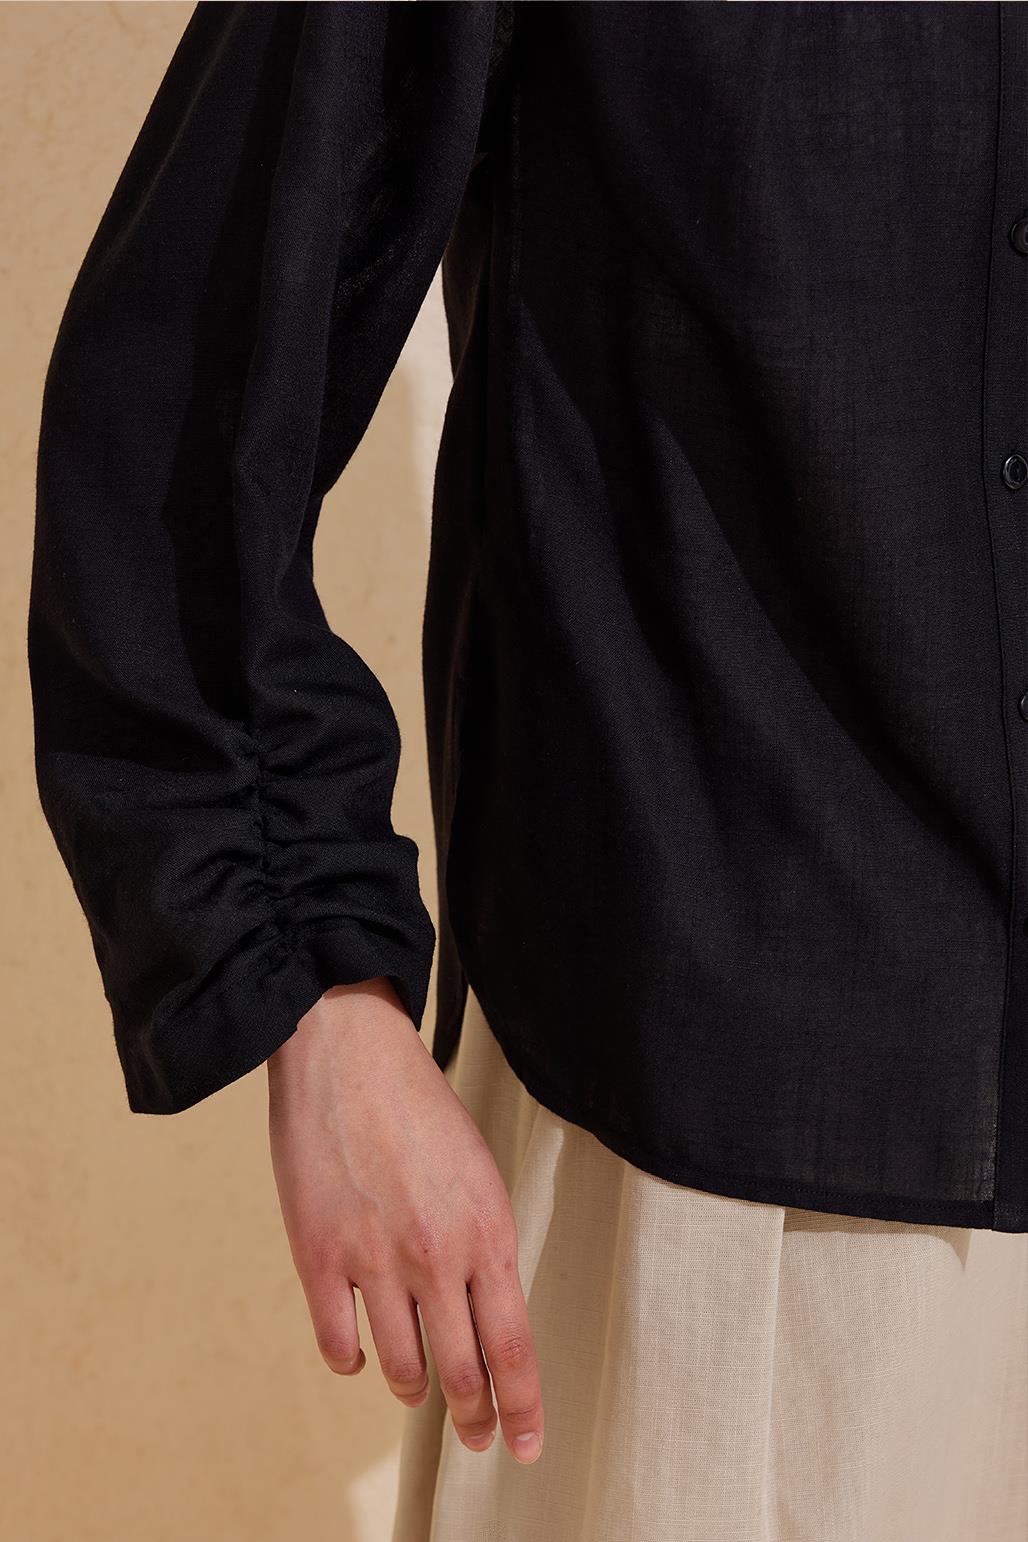 Flam Shirt with Sleeve Detail Black